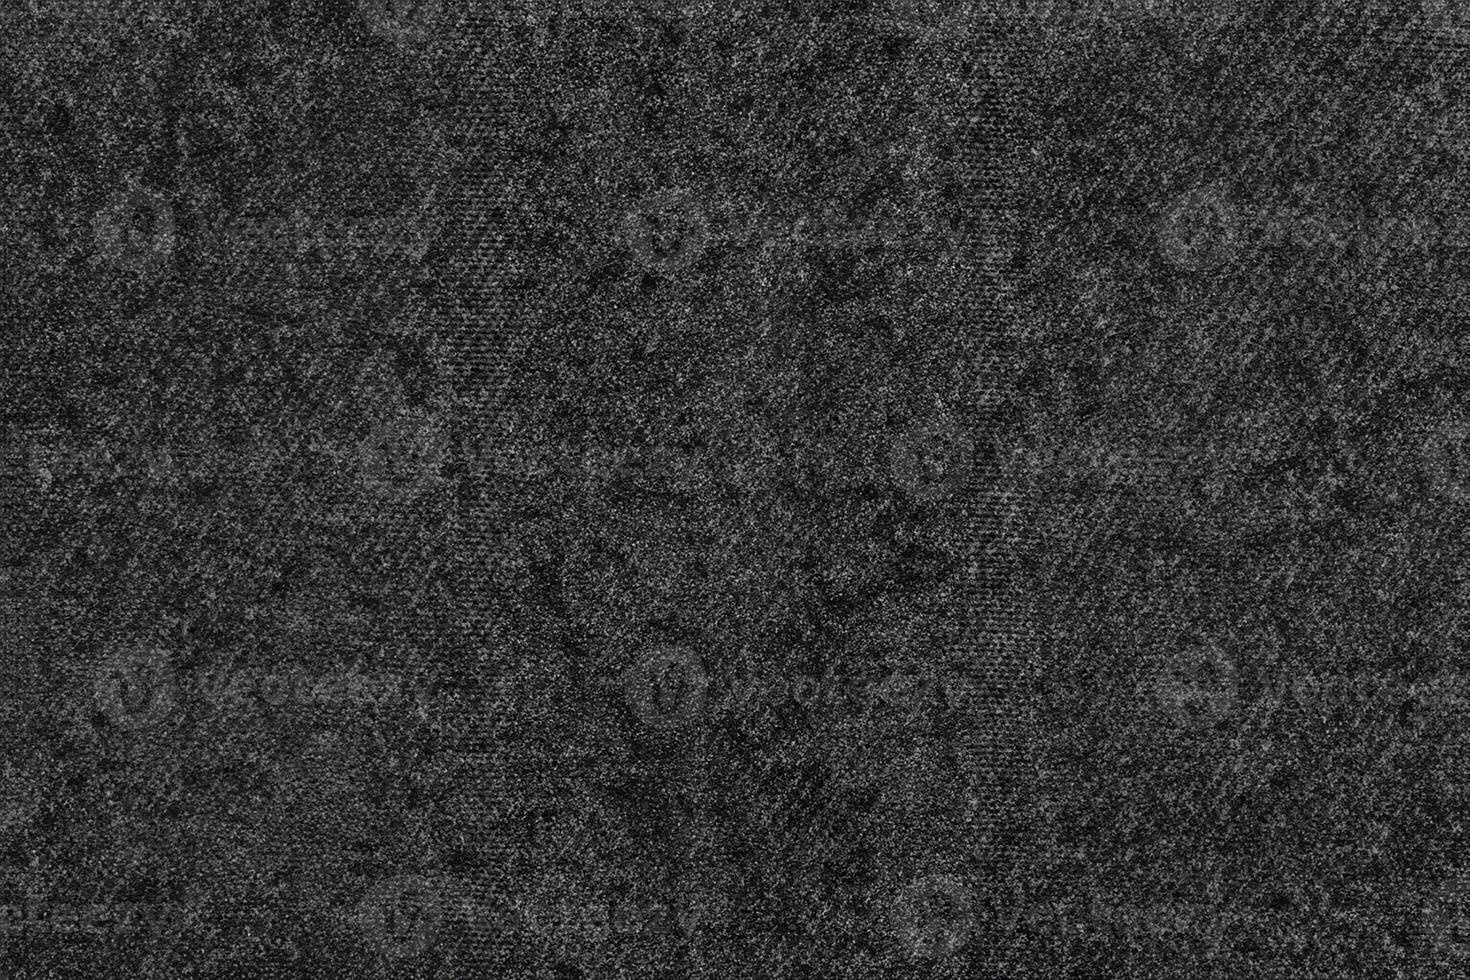 Cozy Knitted Wool Texture, Natural Black with Dark Gray Woven Cotton Canvas Background. photo